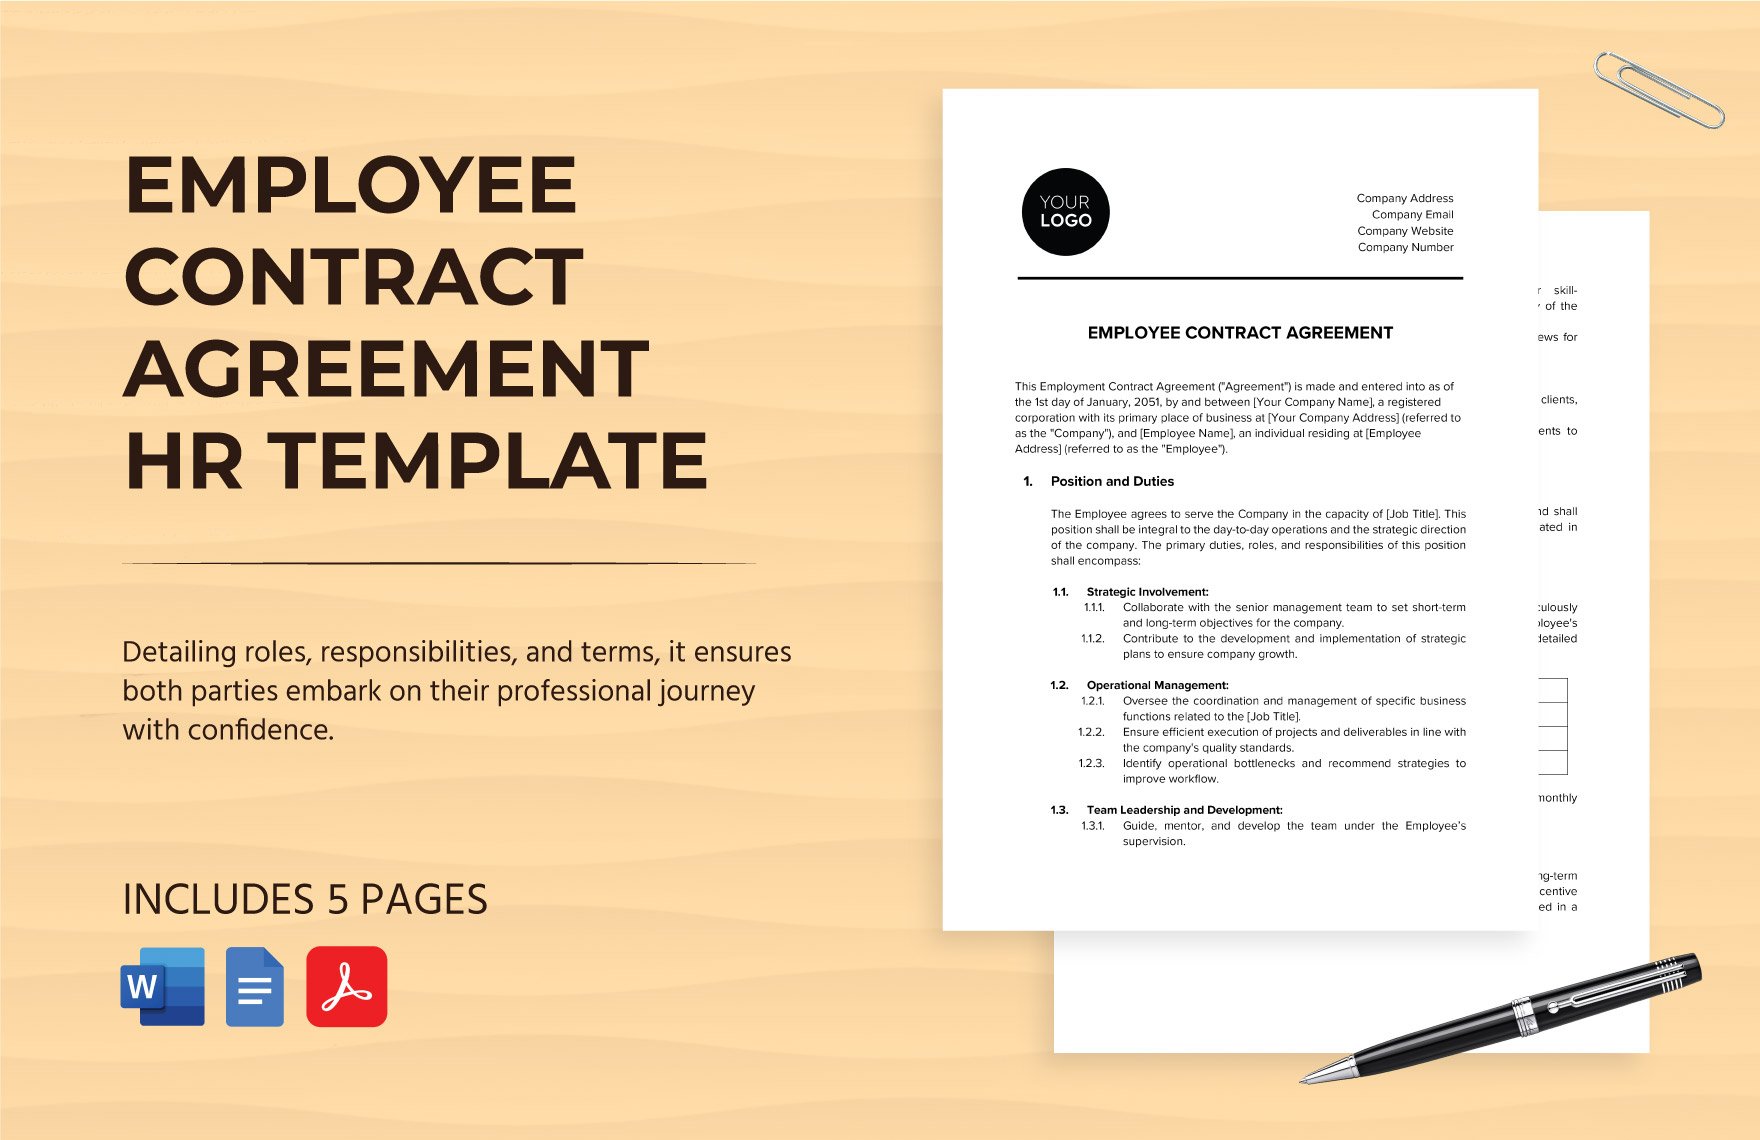 Employee Contract Agreement HR Template in Word, Google Docs, PDF